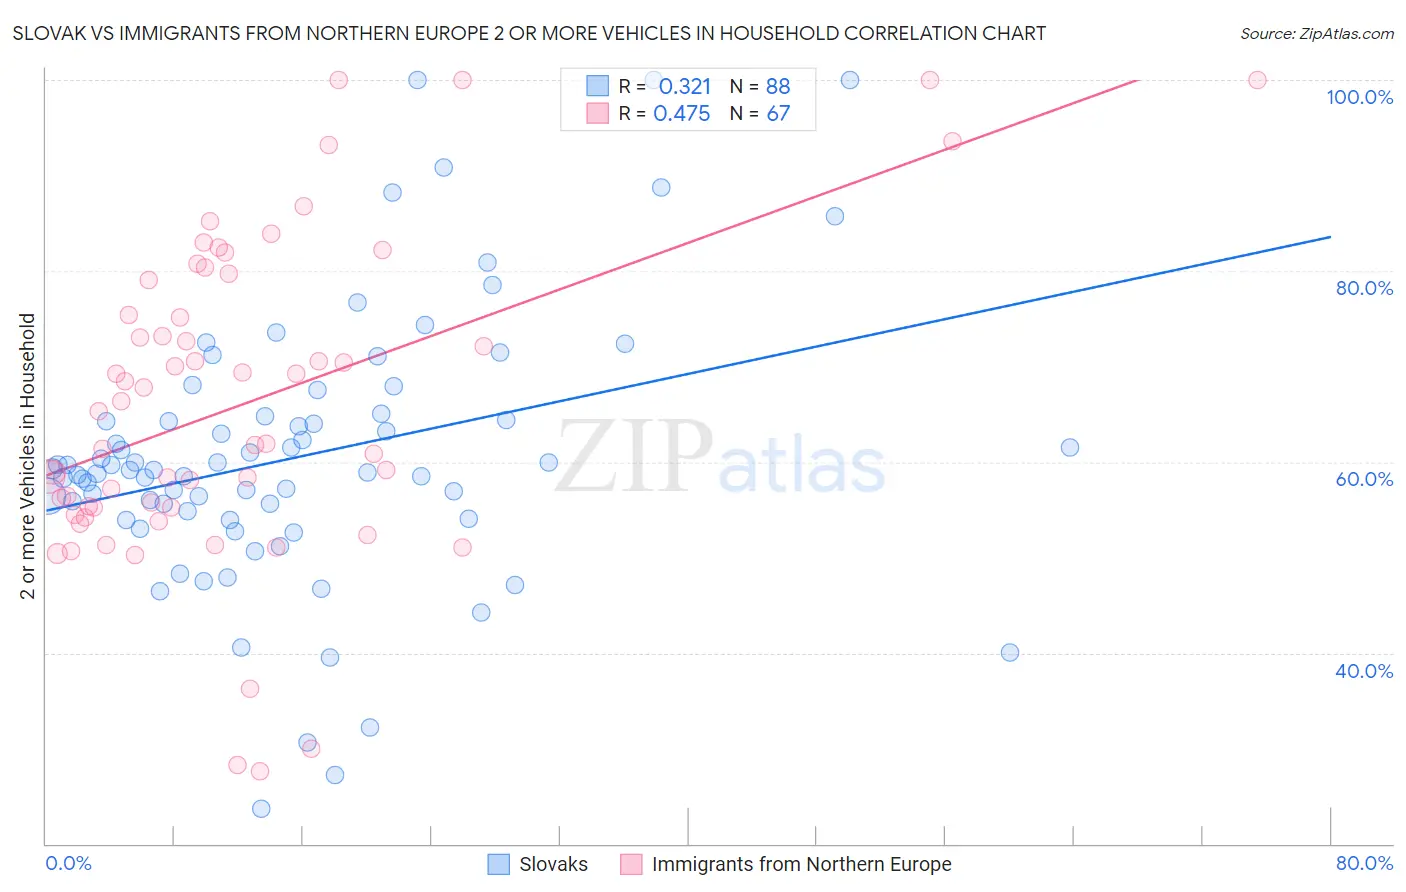 Slovak vs Immigrants from Northern Europe 2 or more Vehicles in Household